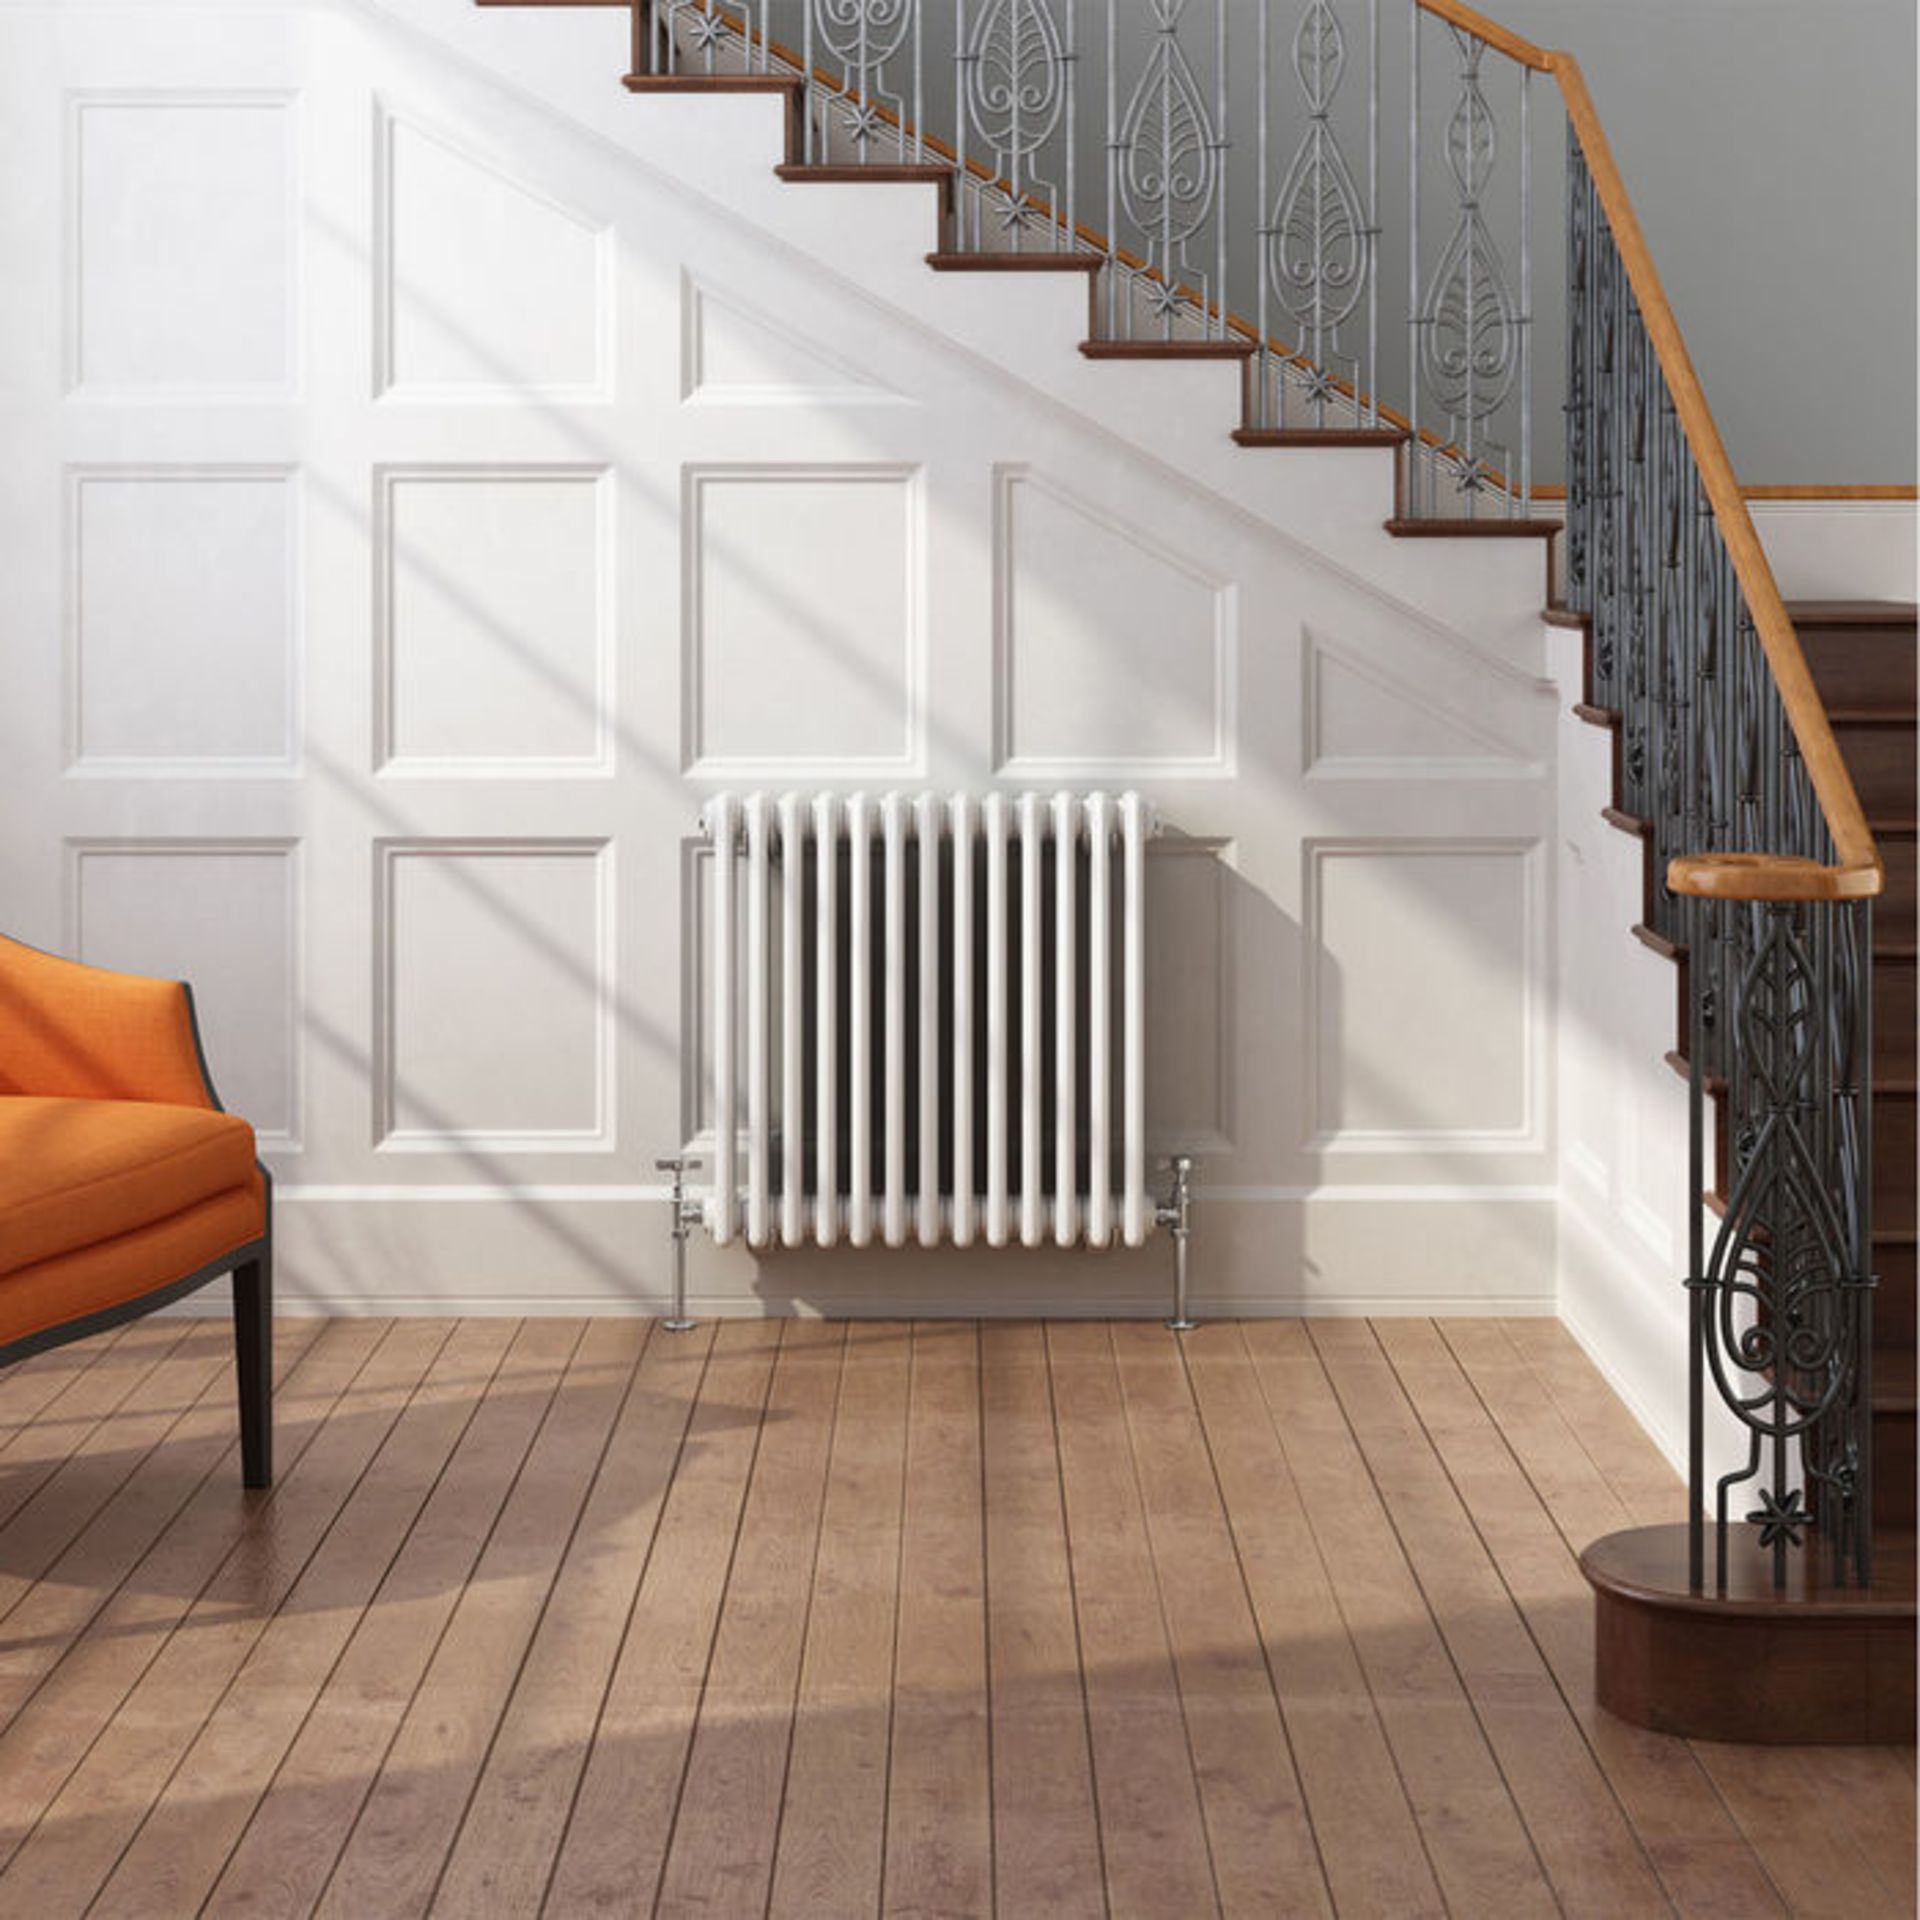 New (S110) 600 x 628mm White Double Panel Horizontal Colosseum Traditional Radiator. RRP £395... - Image 2 of 2